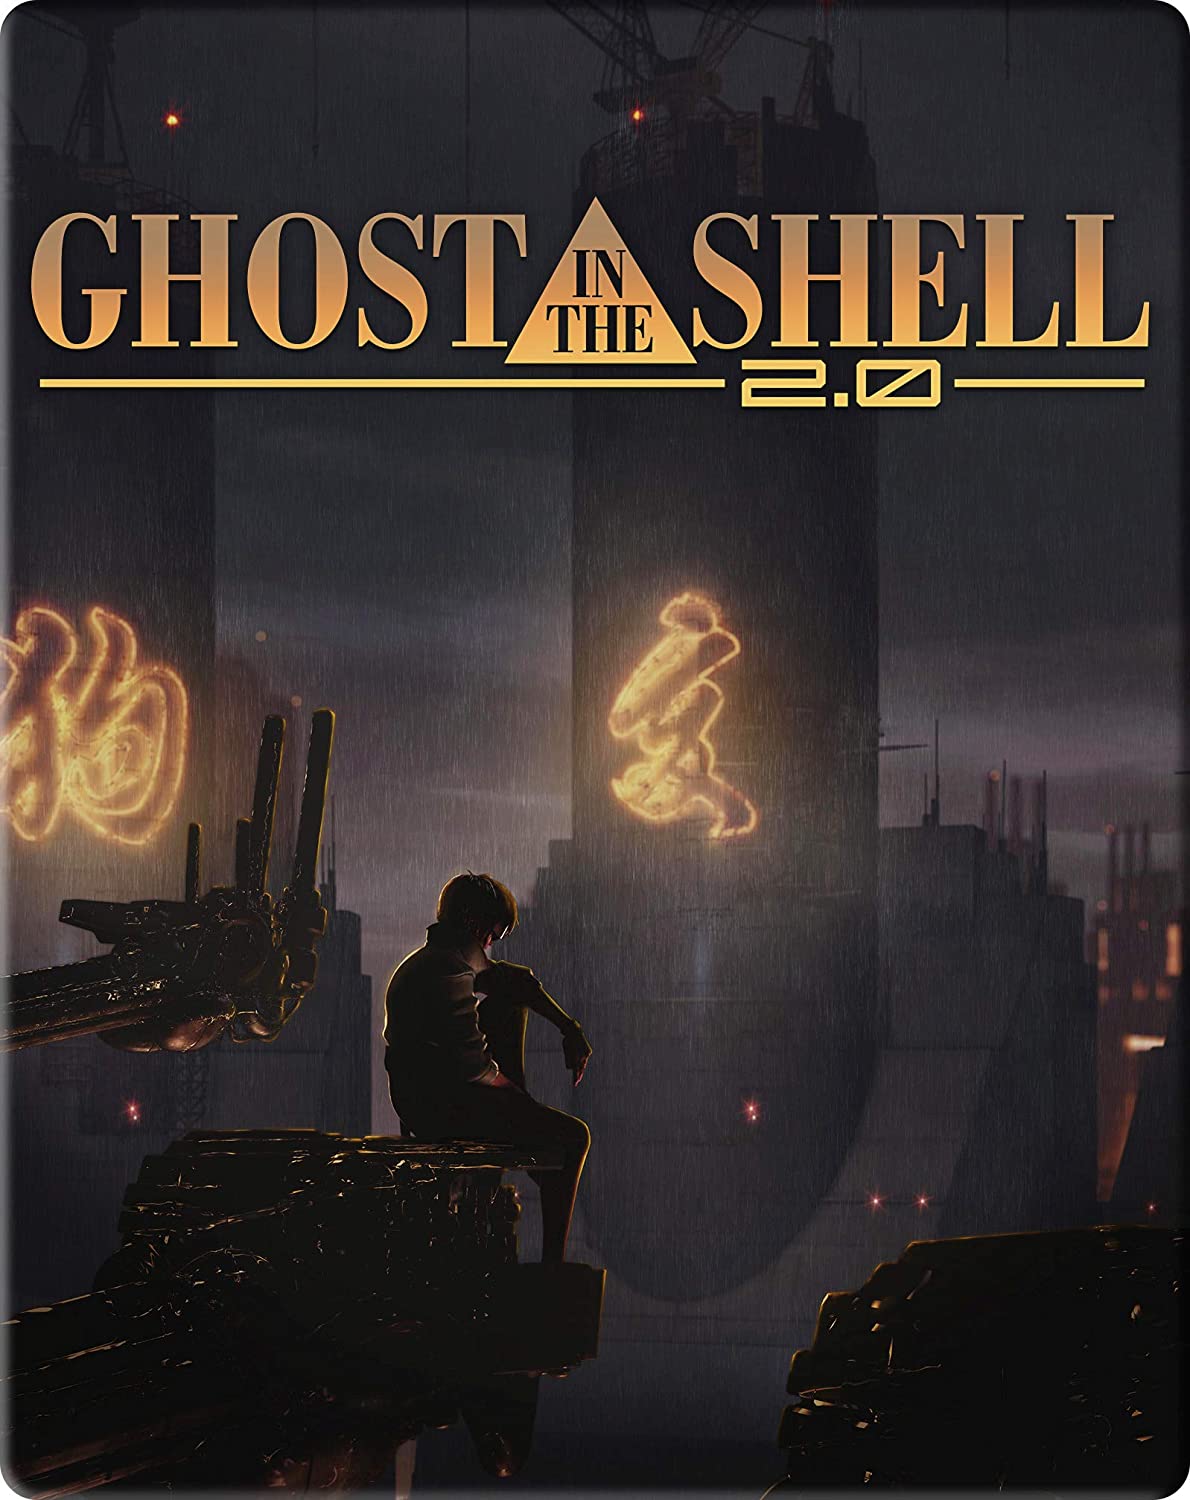 Ghost in the Shell 2.0 im FuturePak Steelcase - Limited Edition